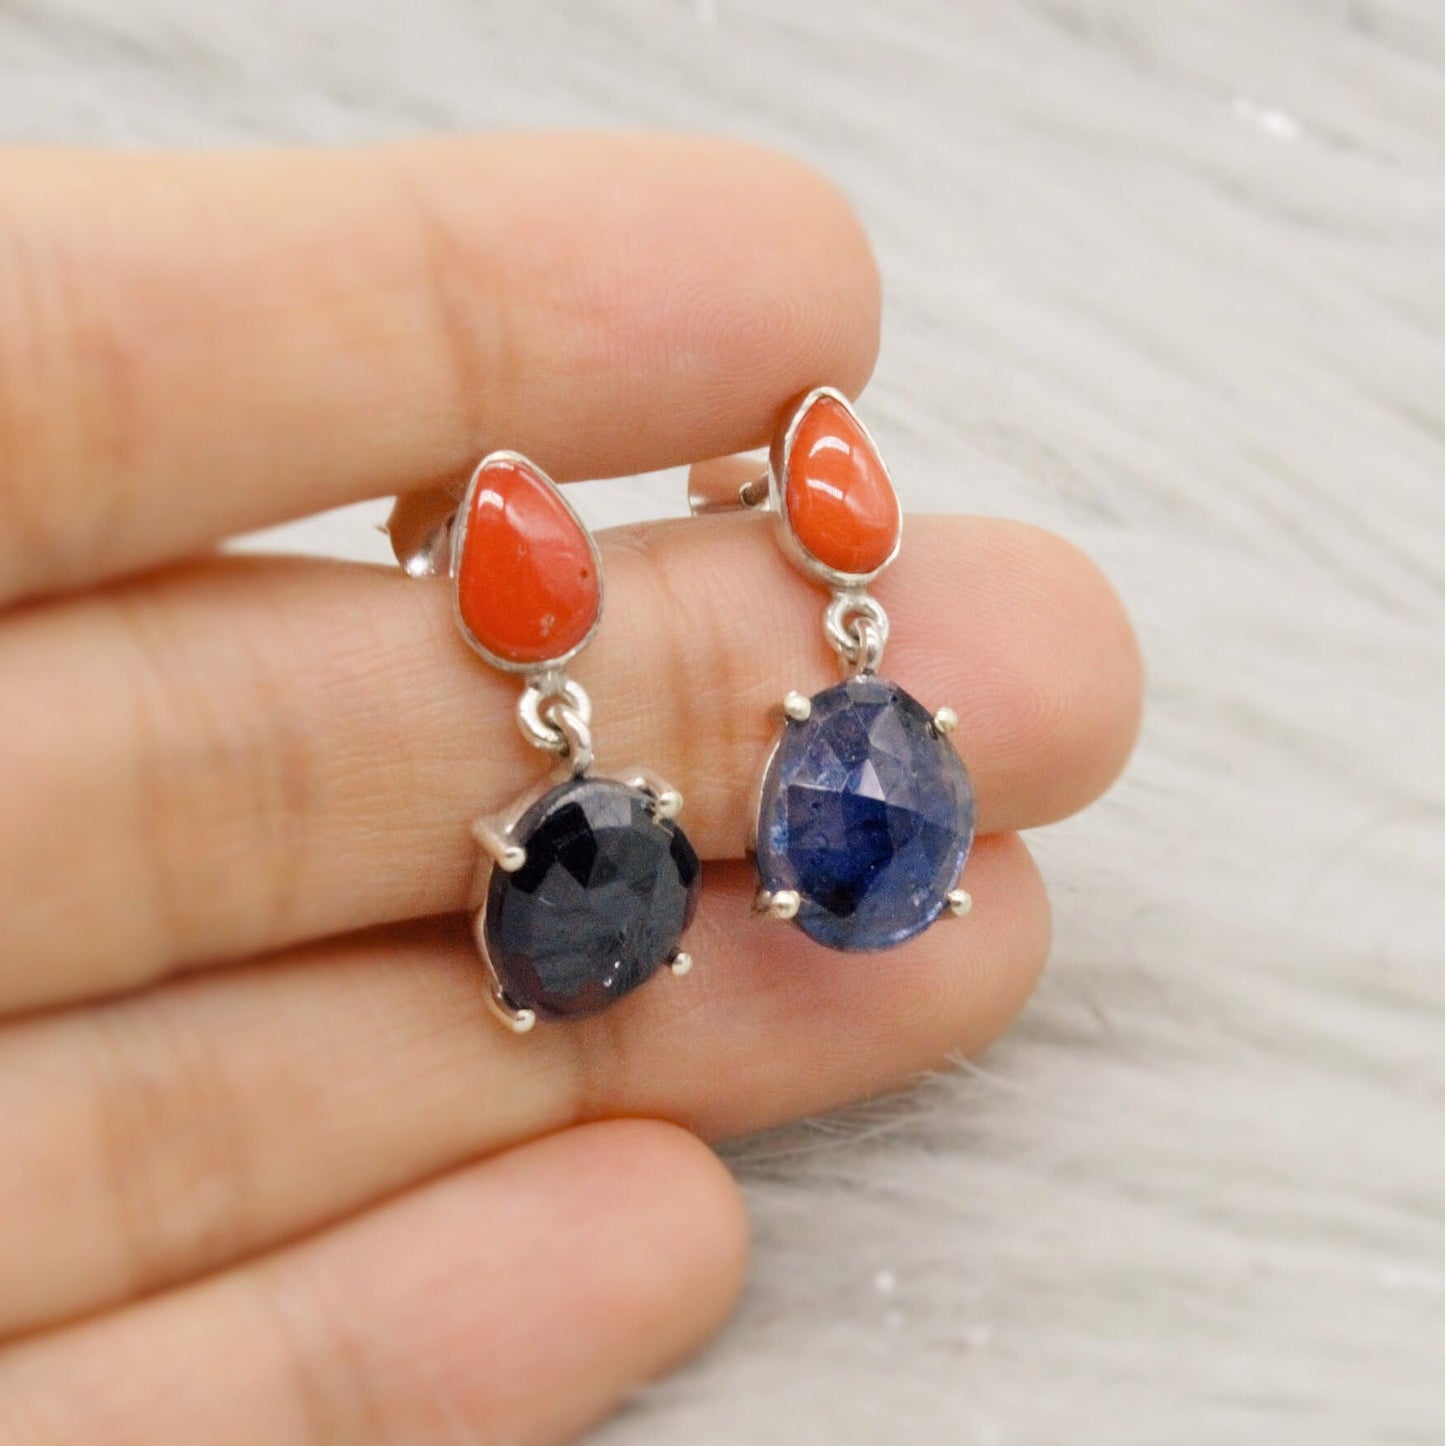 Raw Blue Sapphire, Coral Silver Earrings, Sterling Silver, September Birthstone Jewelry, Gemstone Drop Earrings, Birthday Gifts For Her